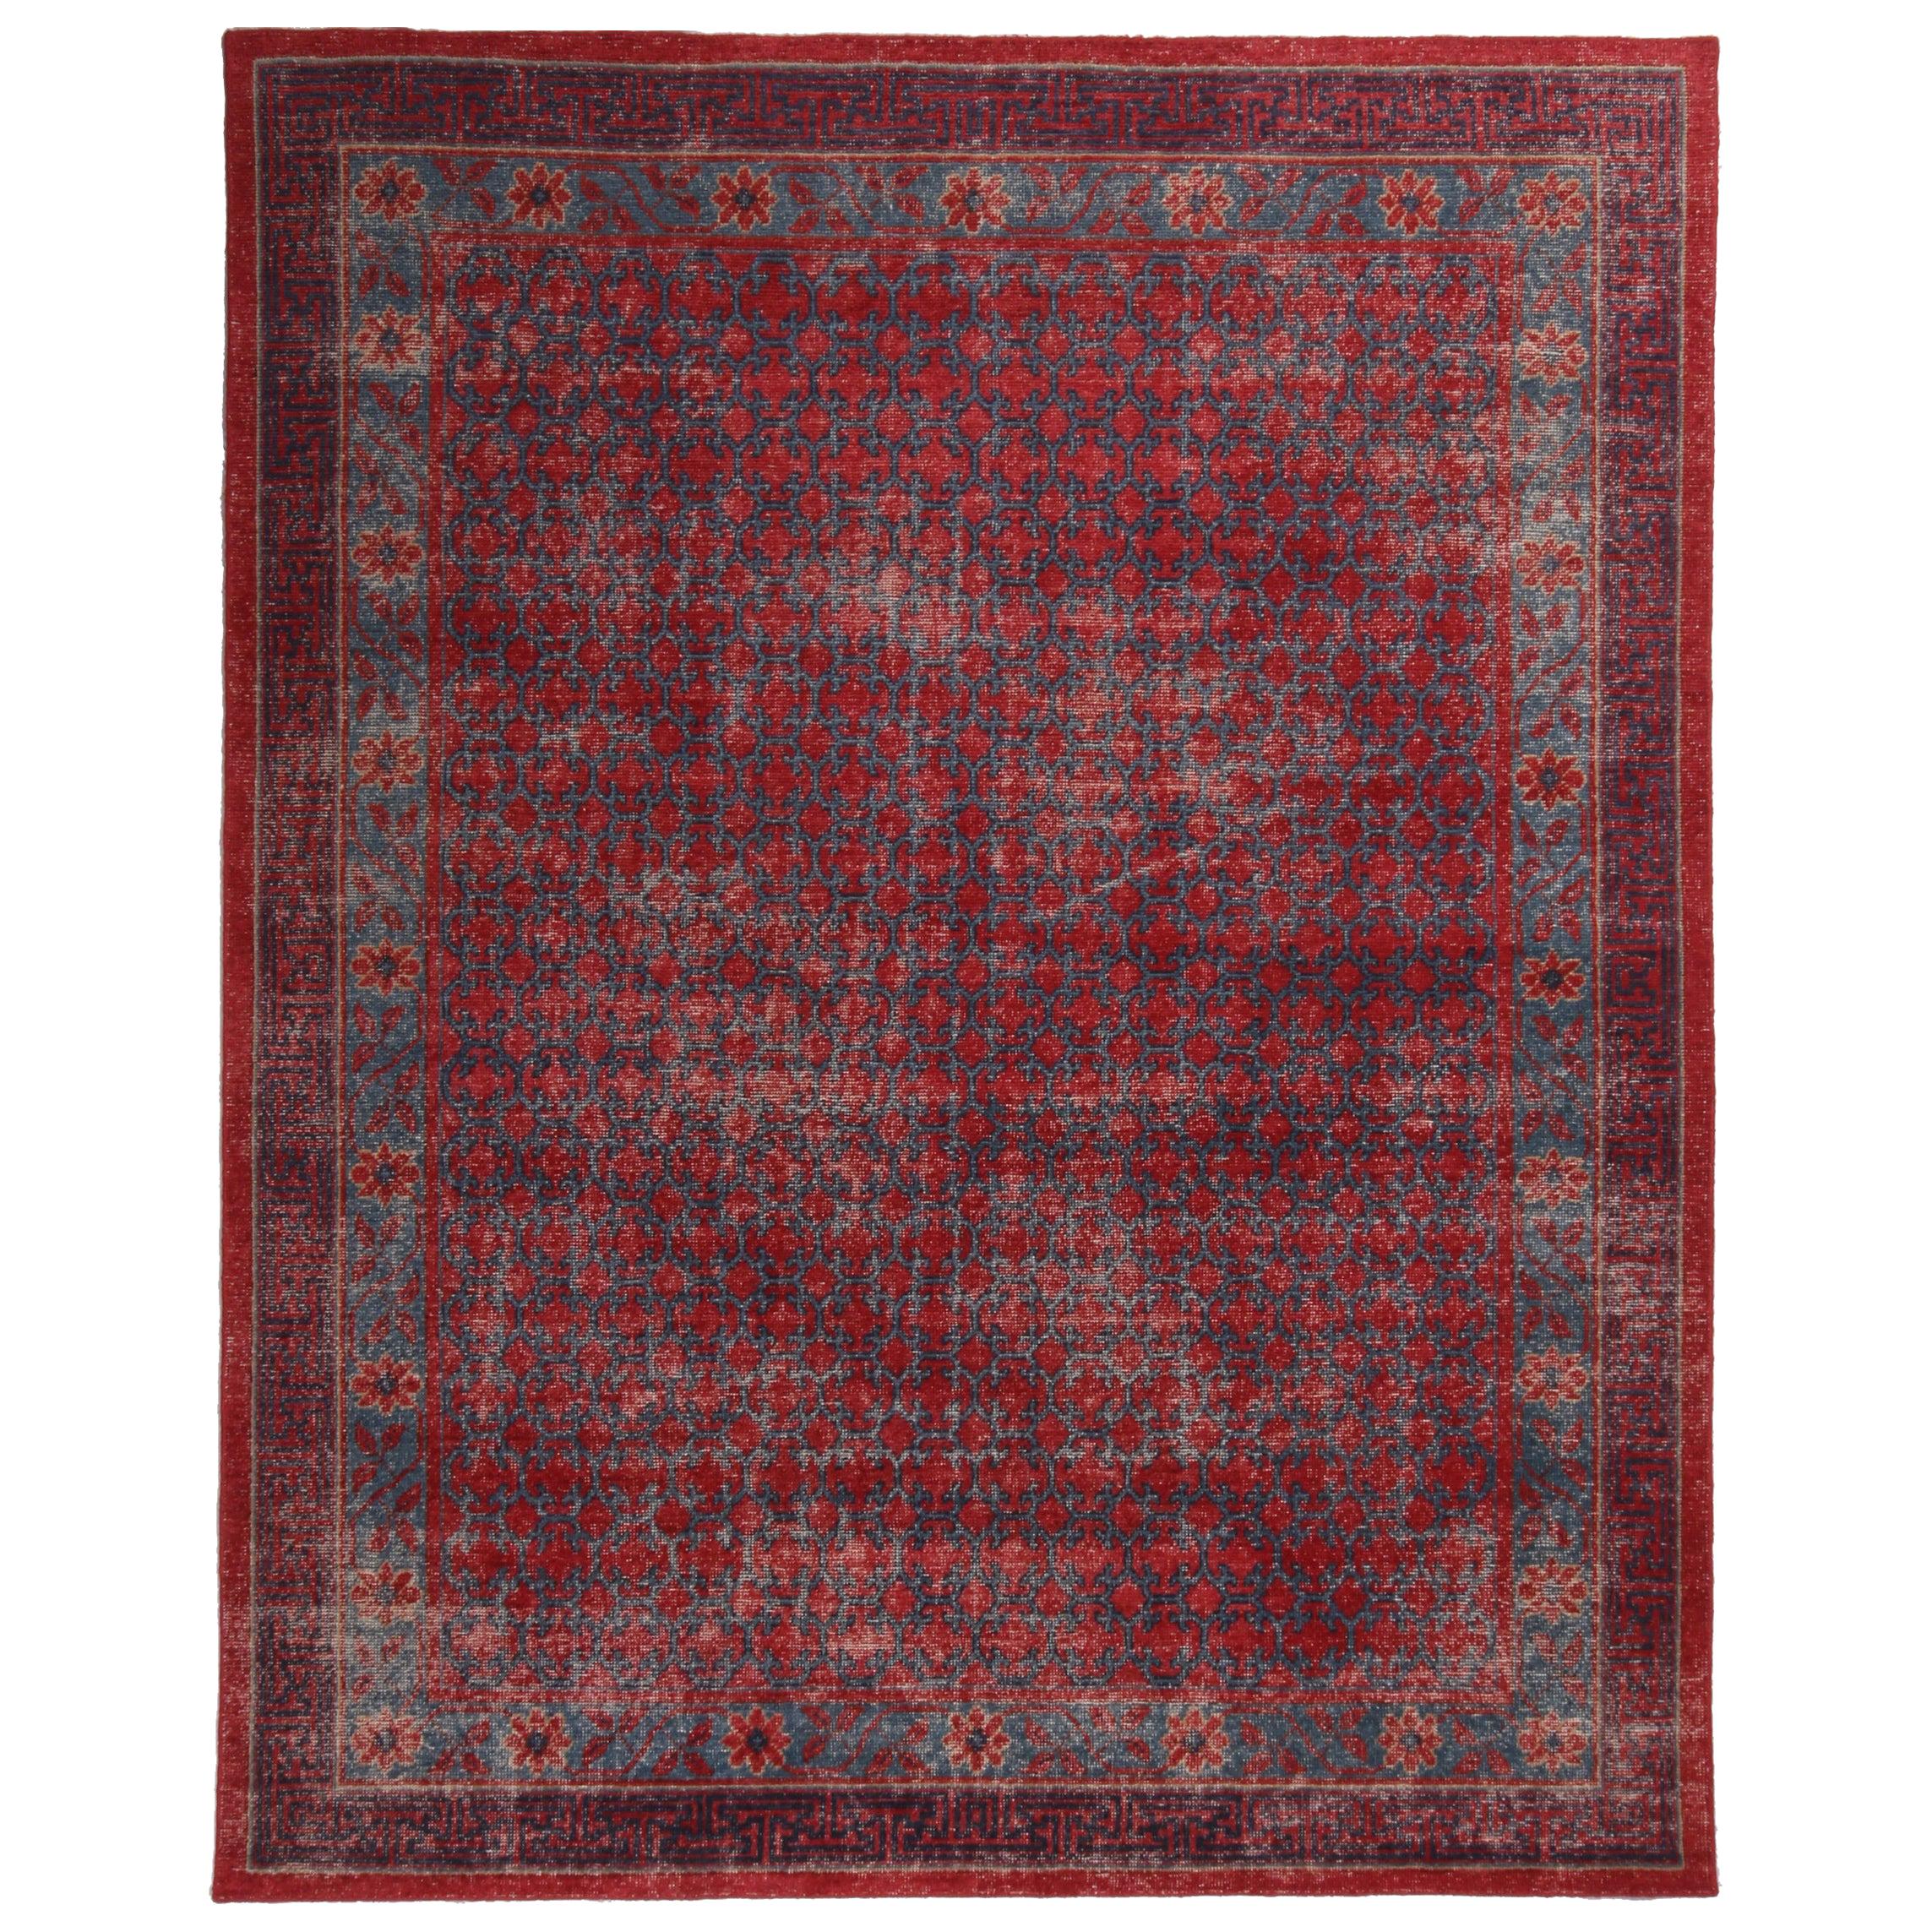 Khotan Velvet Red and Blue Wool Rug from the Homage Collection by Rug & Kilim